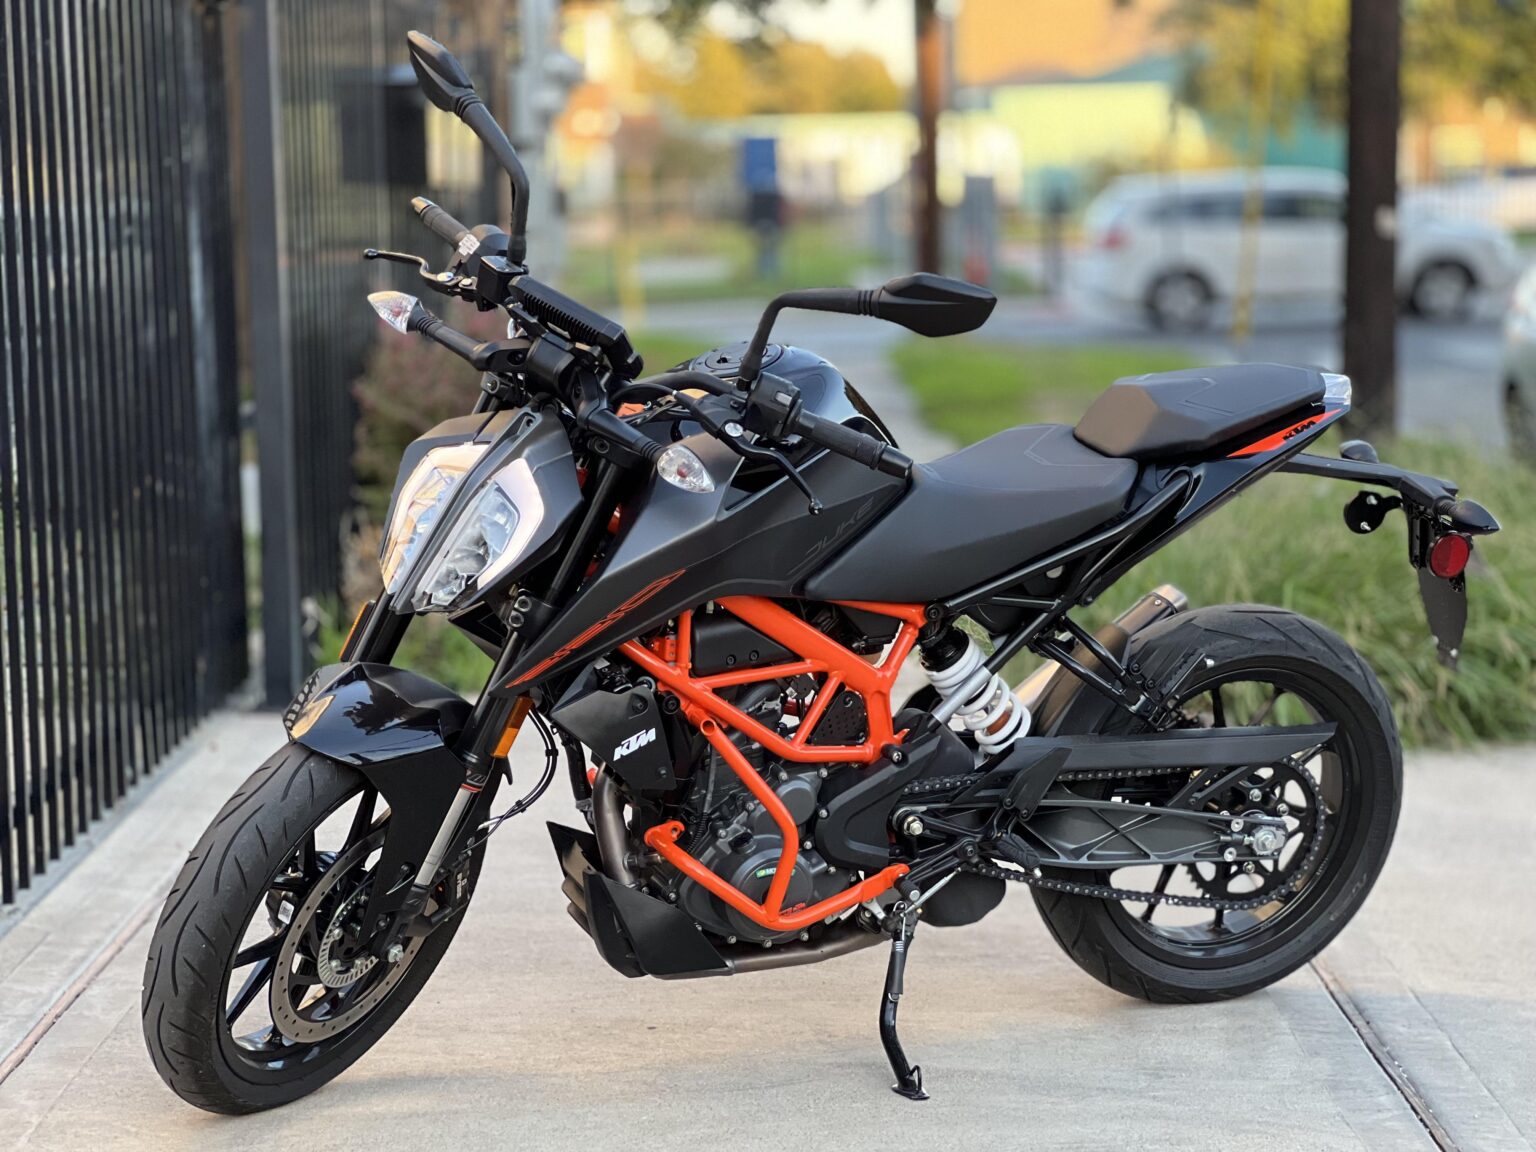 Here is image of black and red colour KTM Bike Which is placed in front of Gate of a building